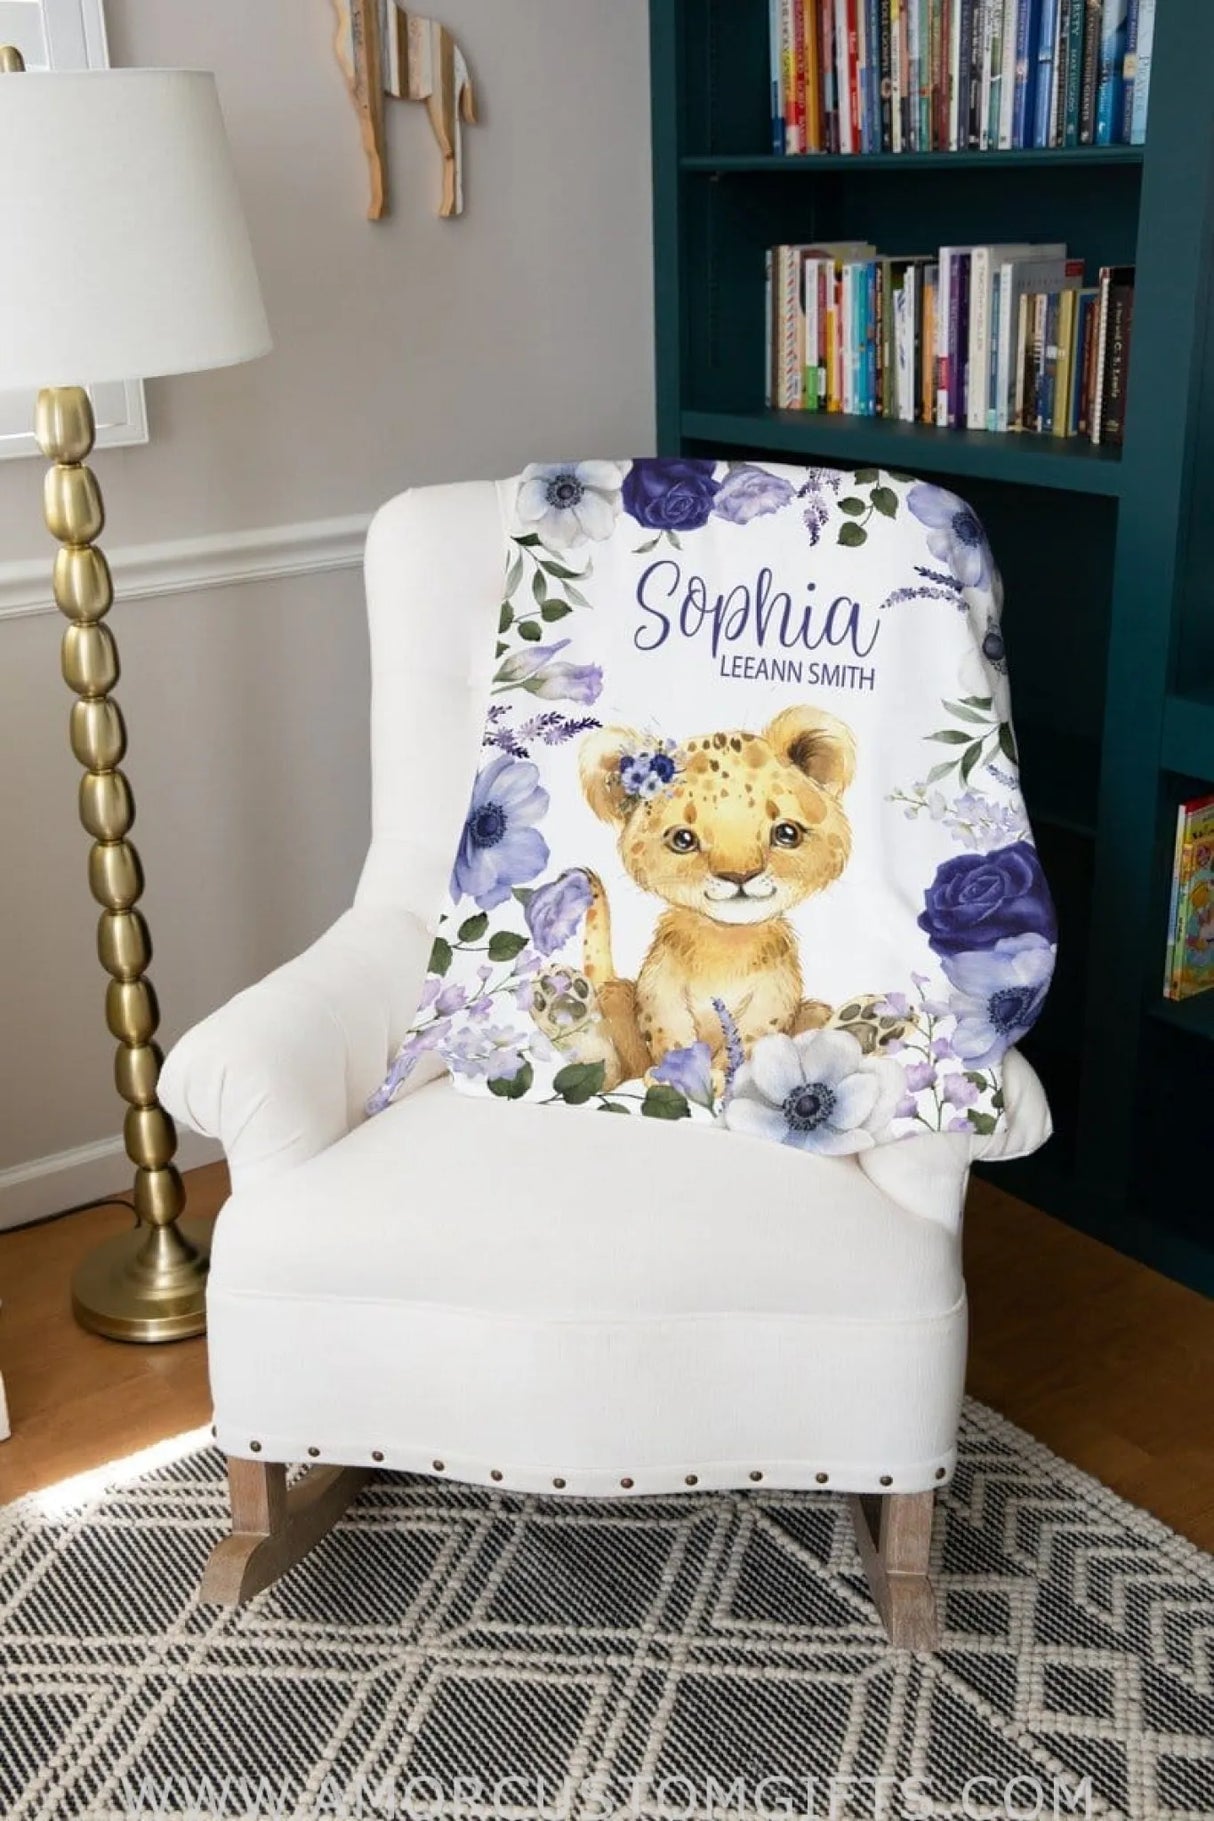 Blankets Lion Baby Girl Personalized Baby Blanket, Name Blanket For Baby Girl, Safari Baby Shower, Unique Baby Gift